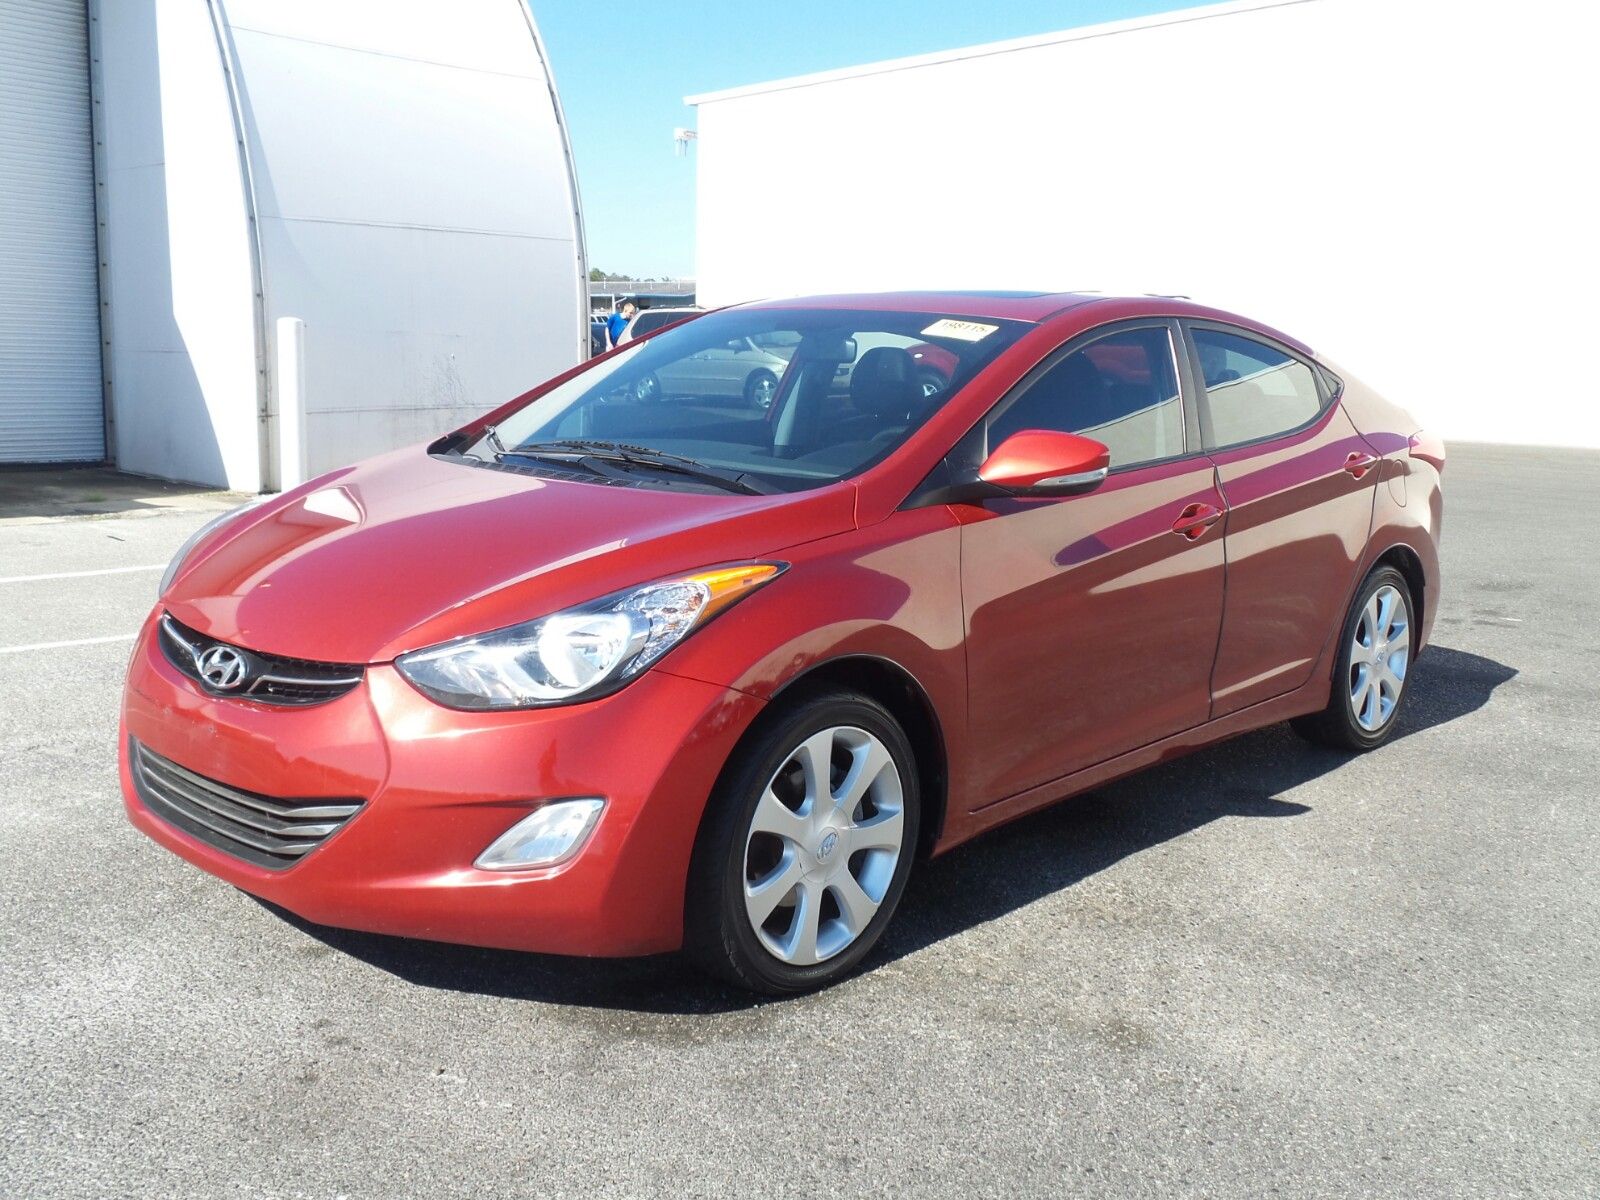 2011 HYUNDAI ELANTRA Specifications and Details for VIN